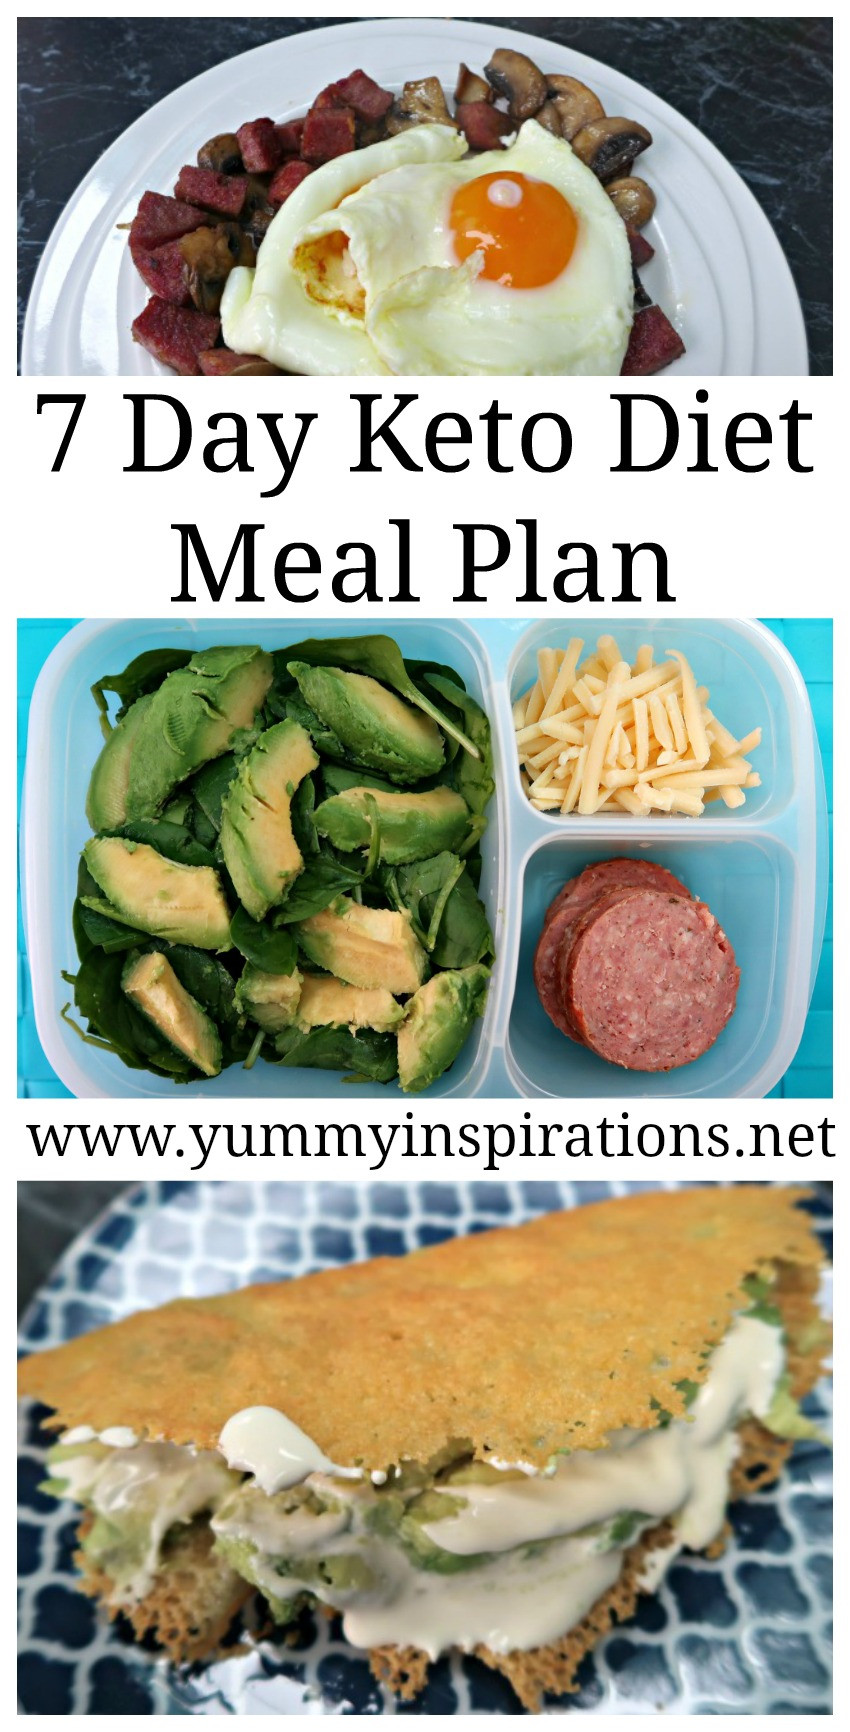 Meals For Keto Diet
 7 Day Keto Diet Meal Plan For Weight Loss Ketogenic Foods